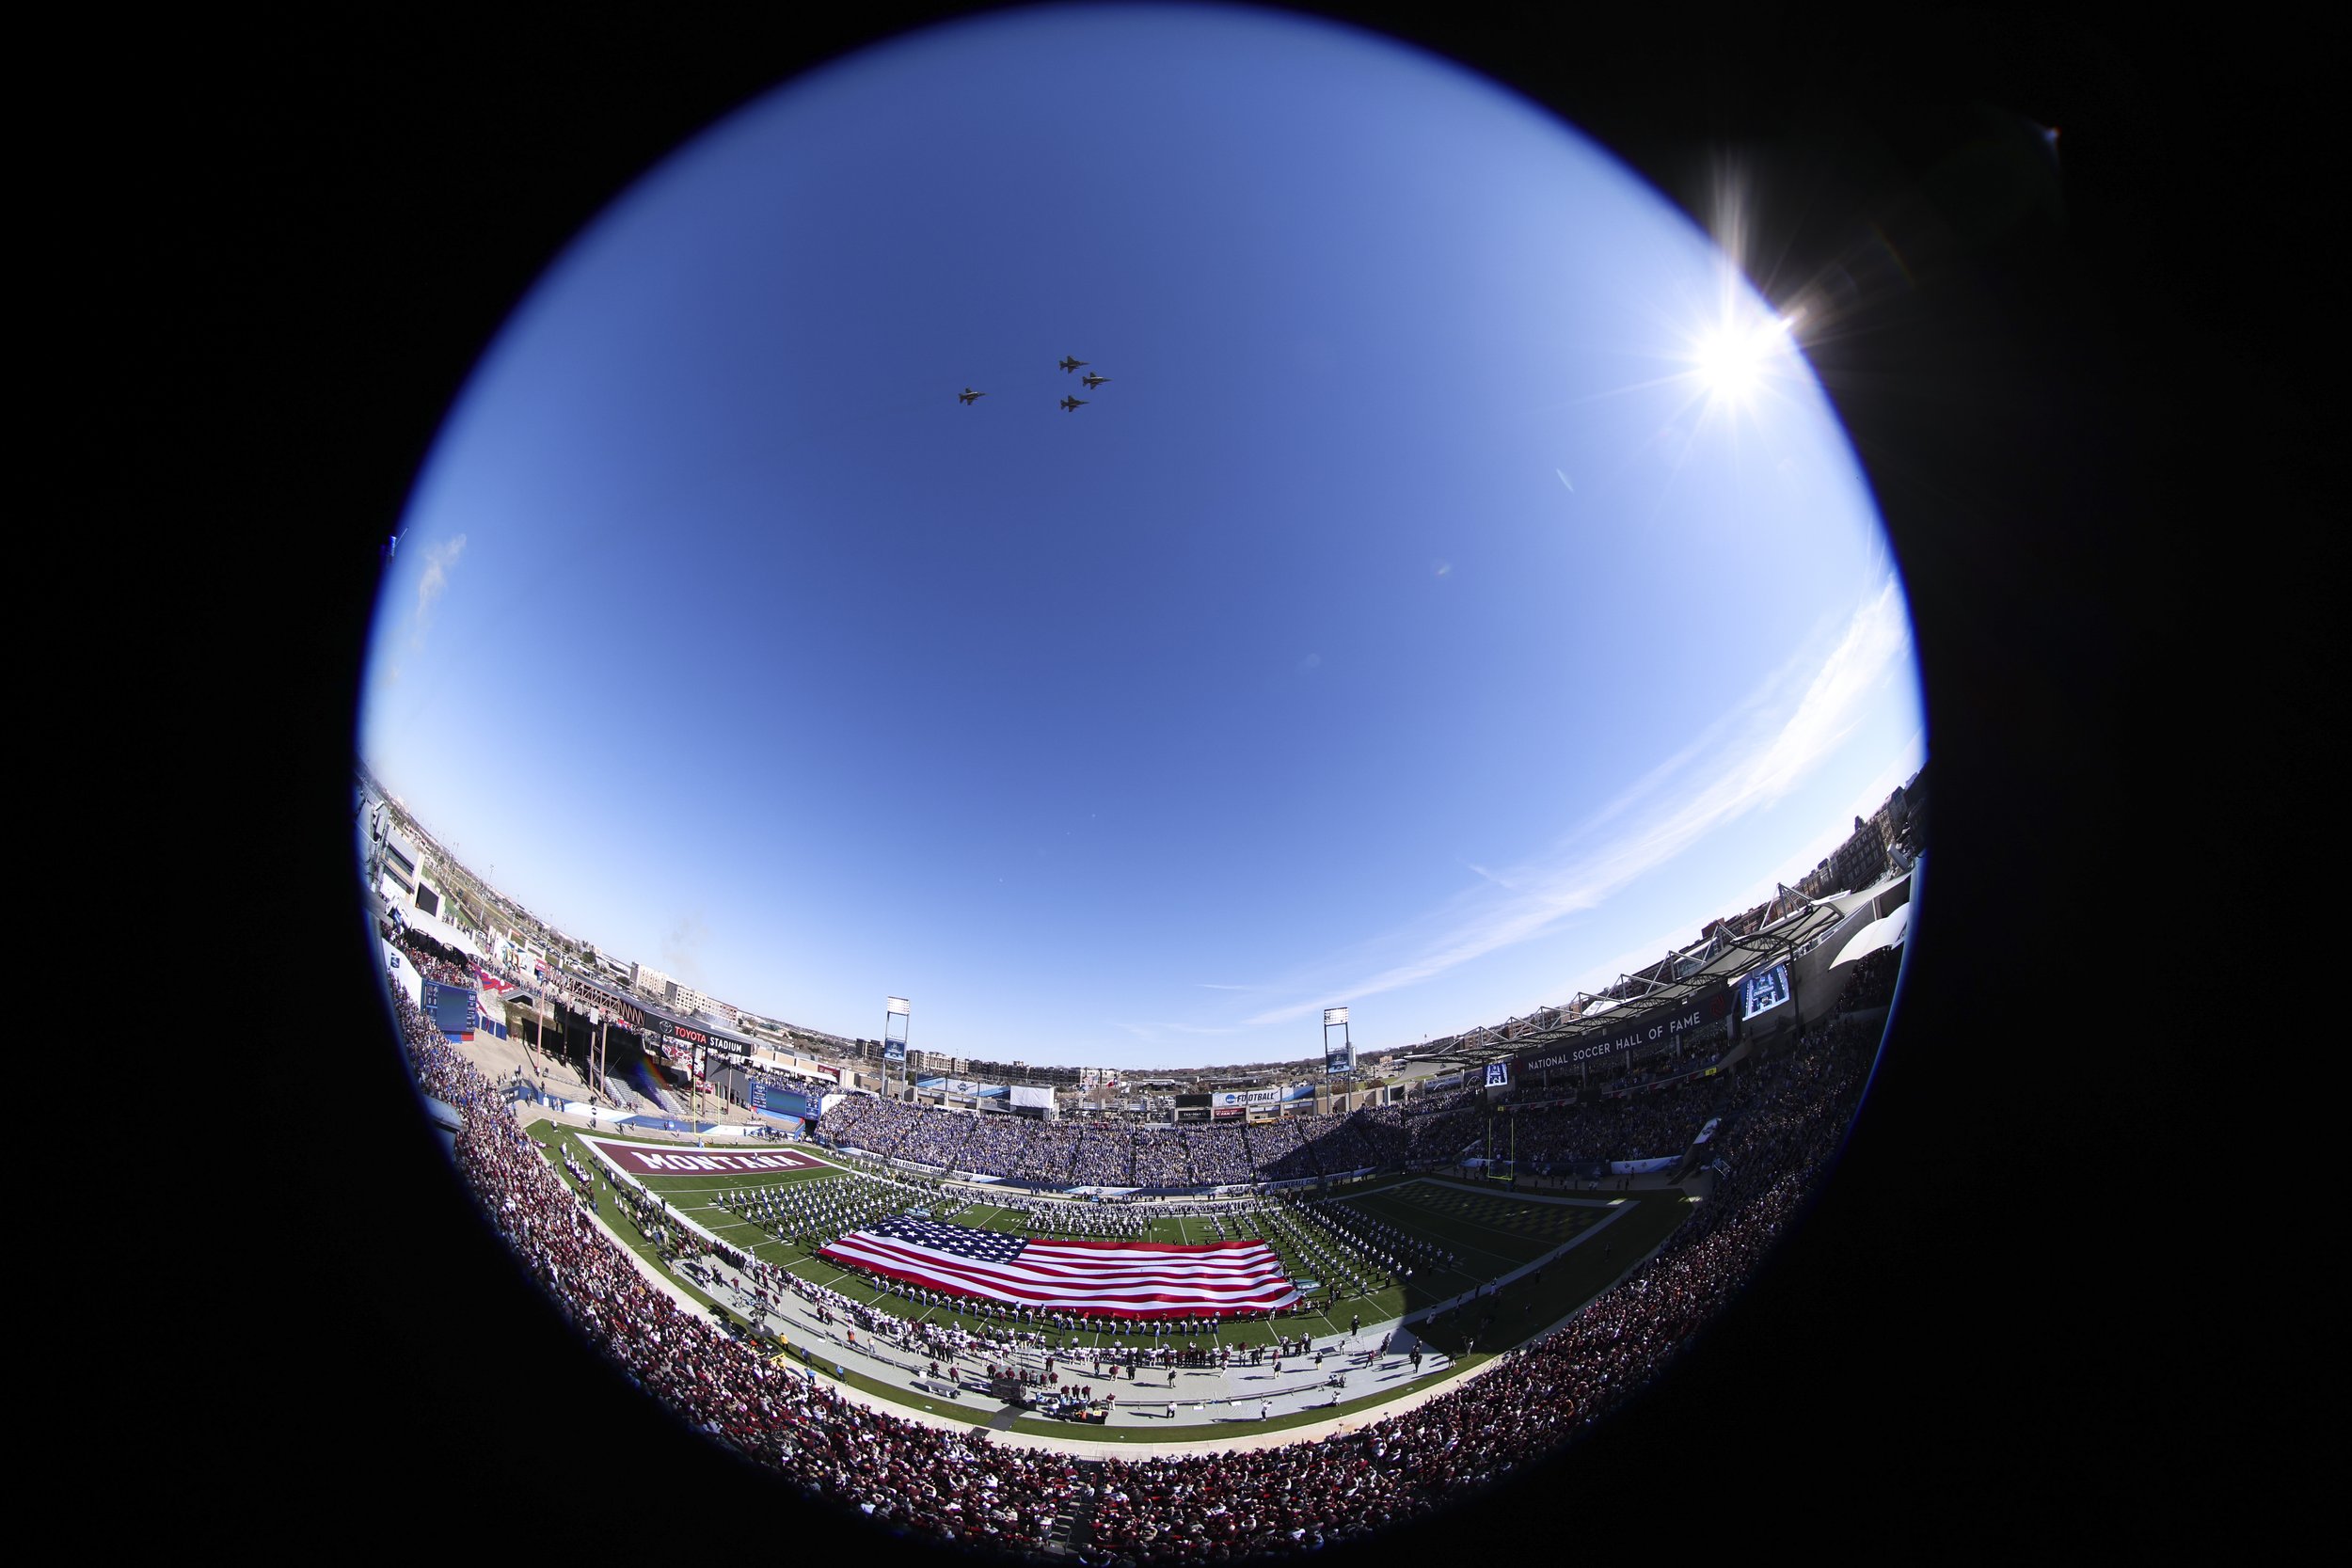  FRISCO, TEXAS - JANUARY 7: (EDITORS NOTE: image has been taken with a fisheye lens) A flyover takes place during the national anthem before the Division I FCS Football Championship game between the South Dakota State Jackrabbits and the Montana Griz